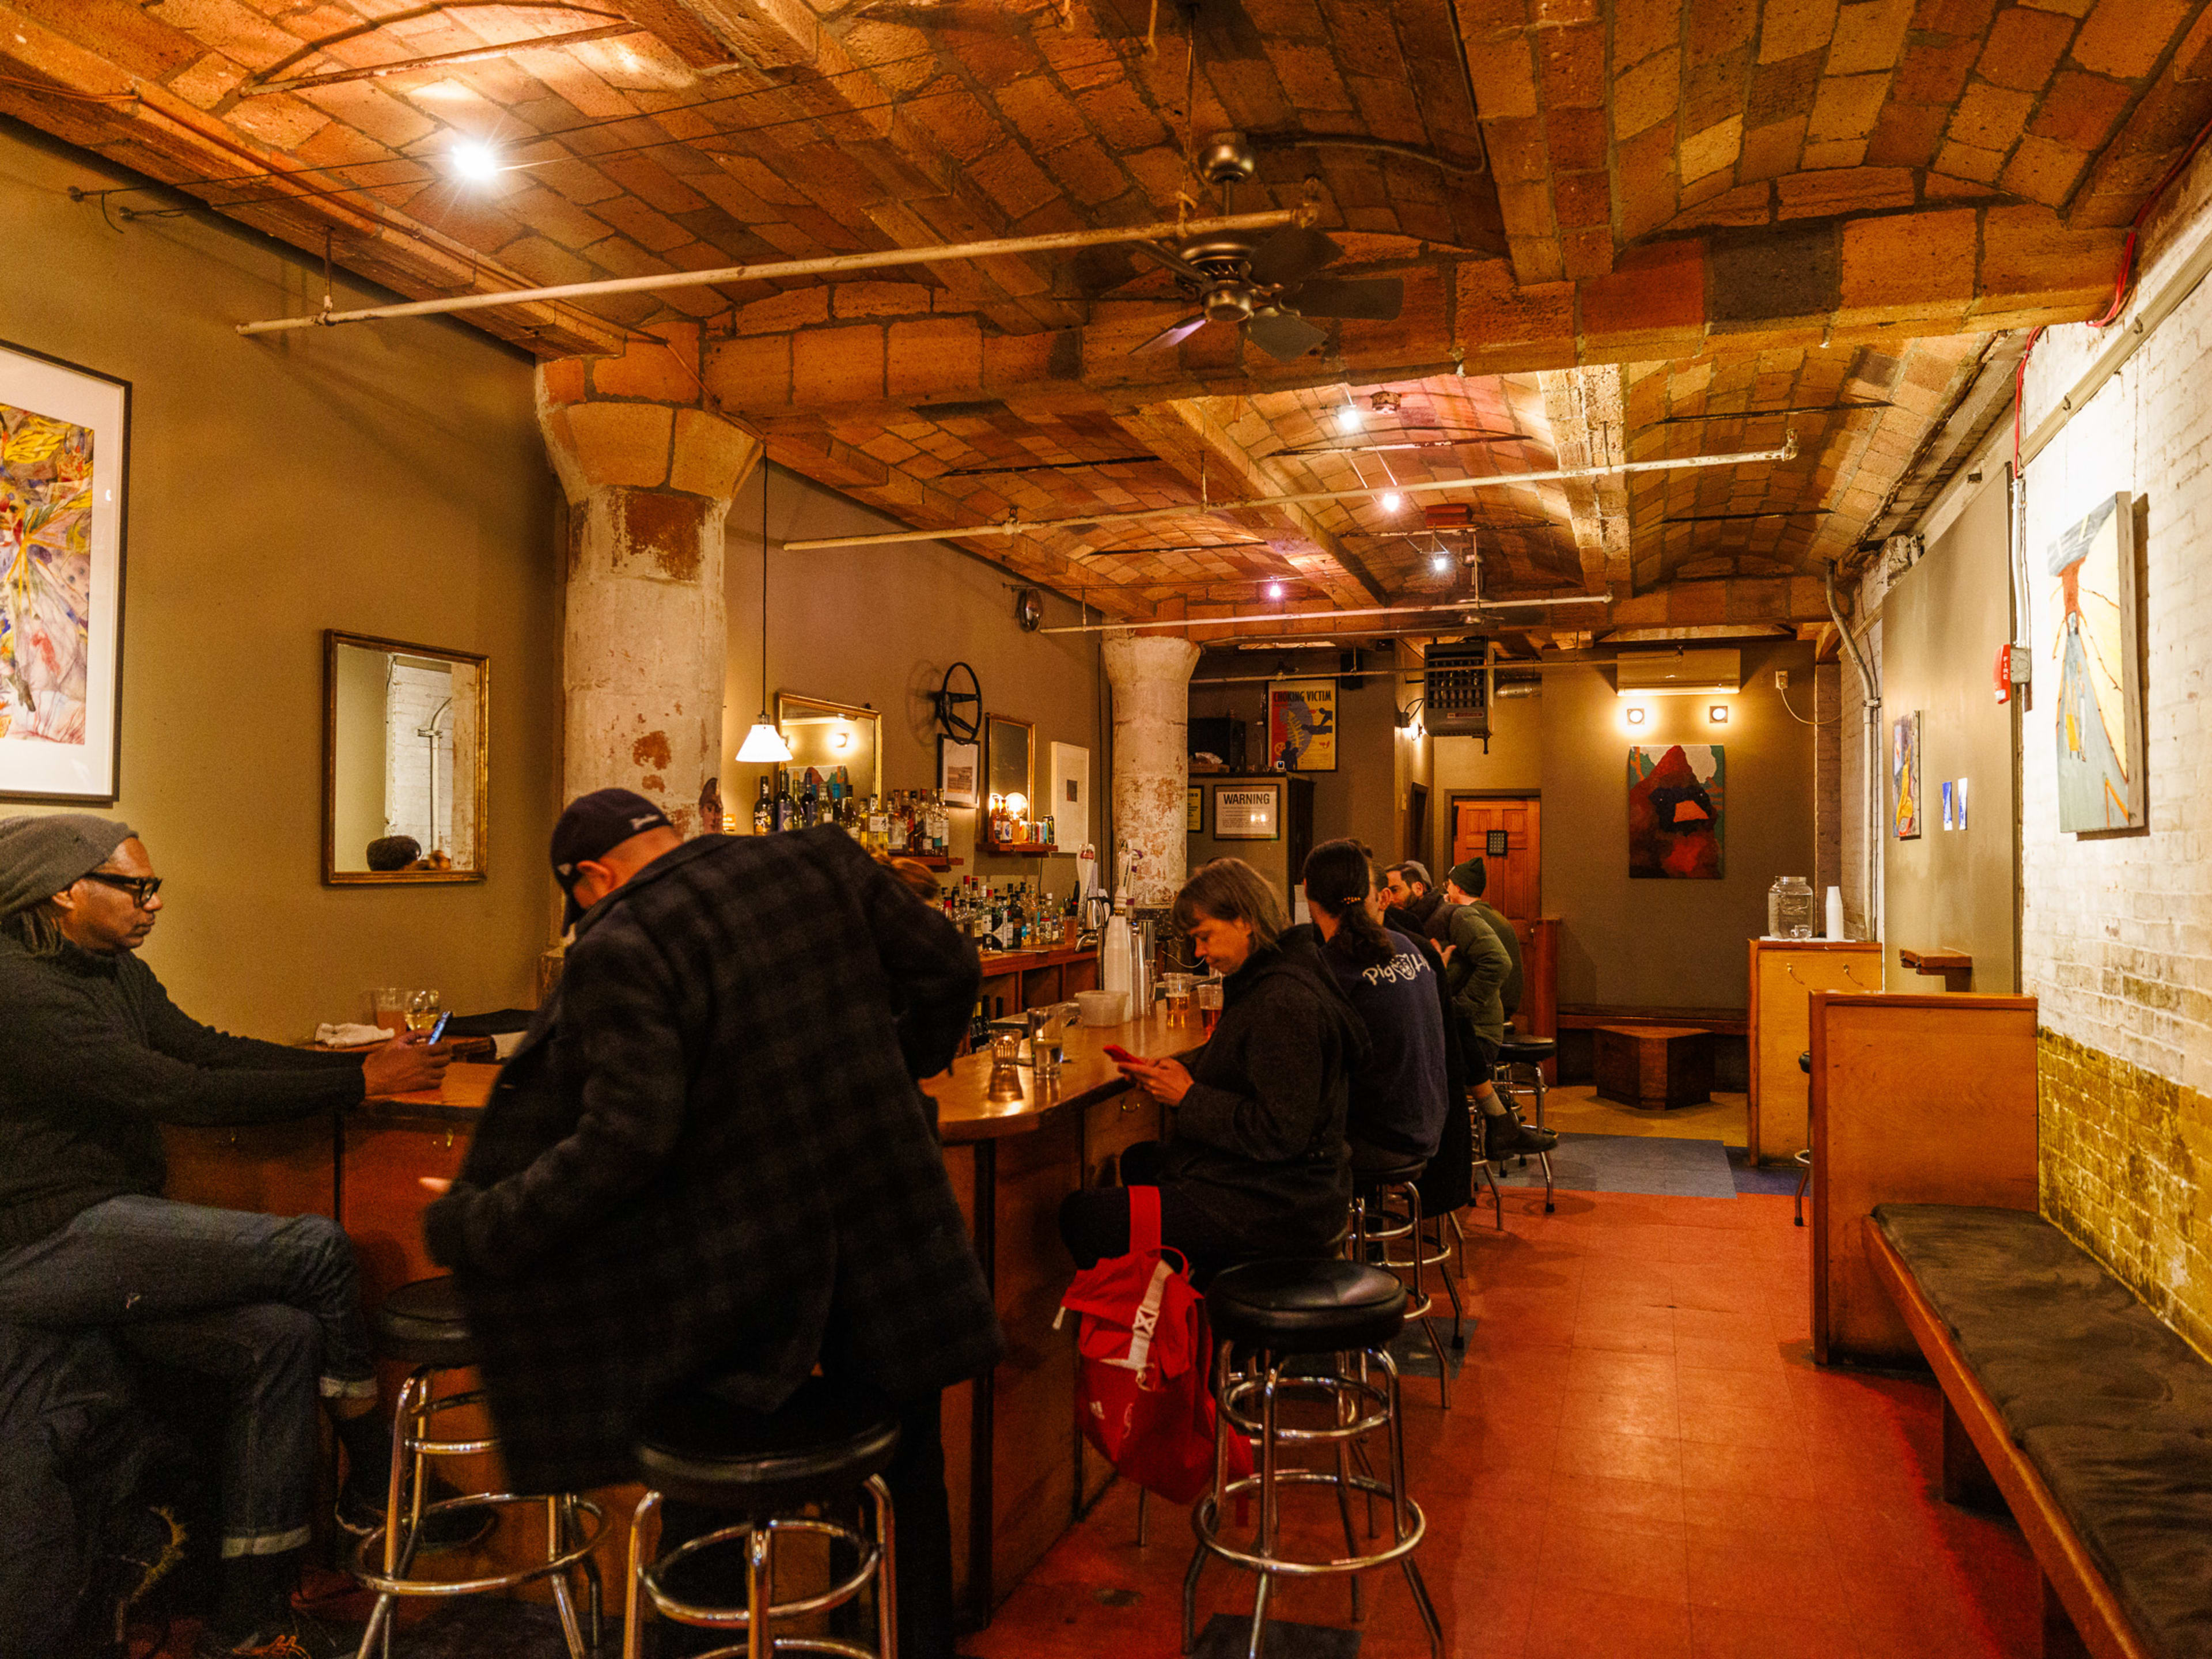 68 Jay St Bar interior with wood ceiling, benches on the right, and people seated around the bar on the left